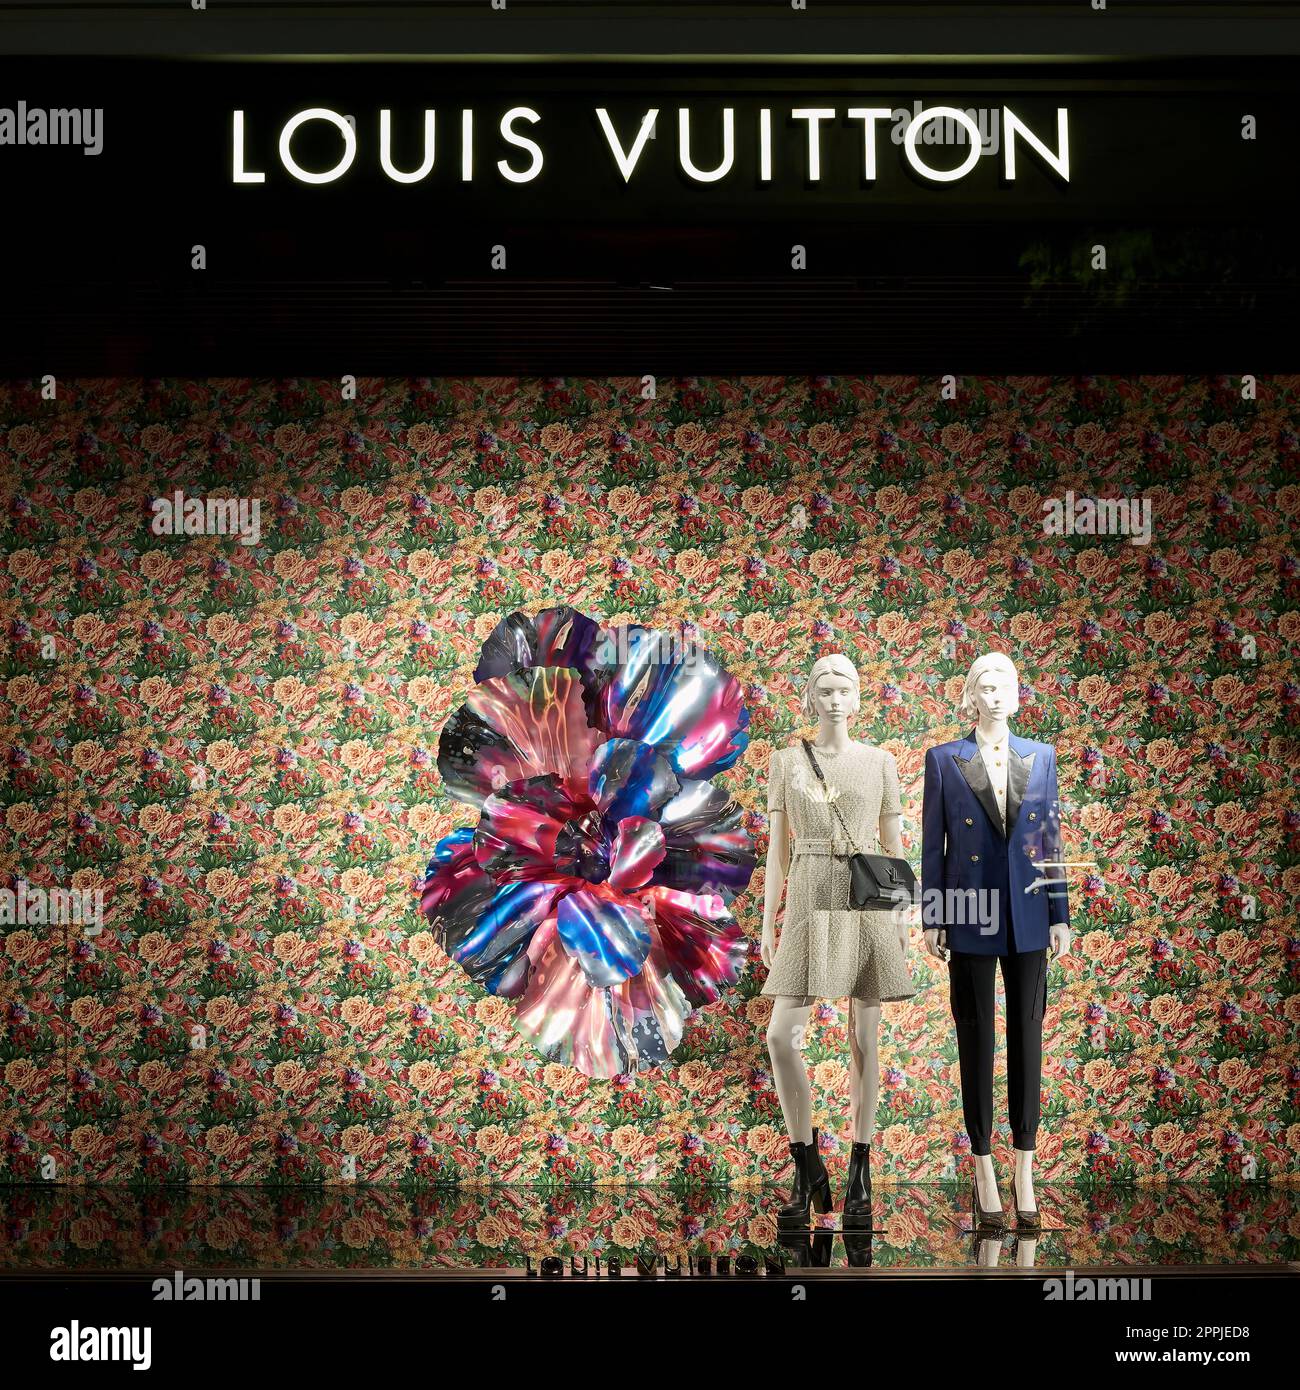 Luxury Brand Stock: Louis Vuitton and Kering